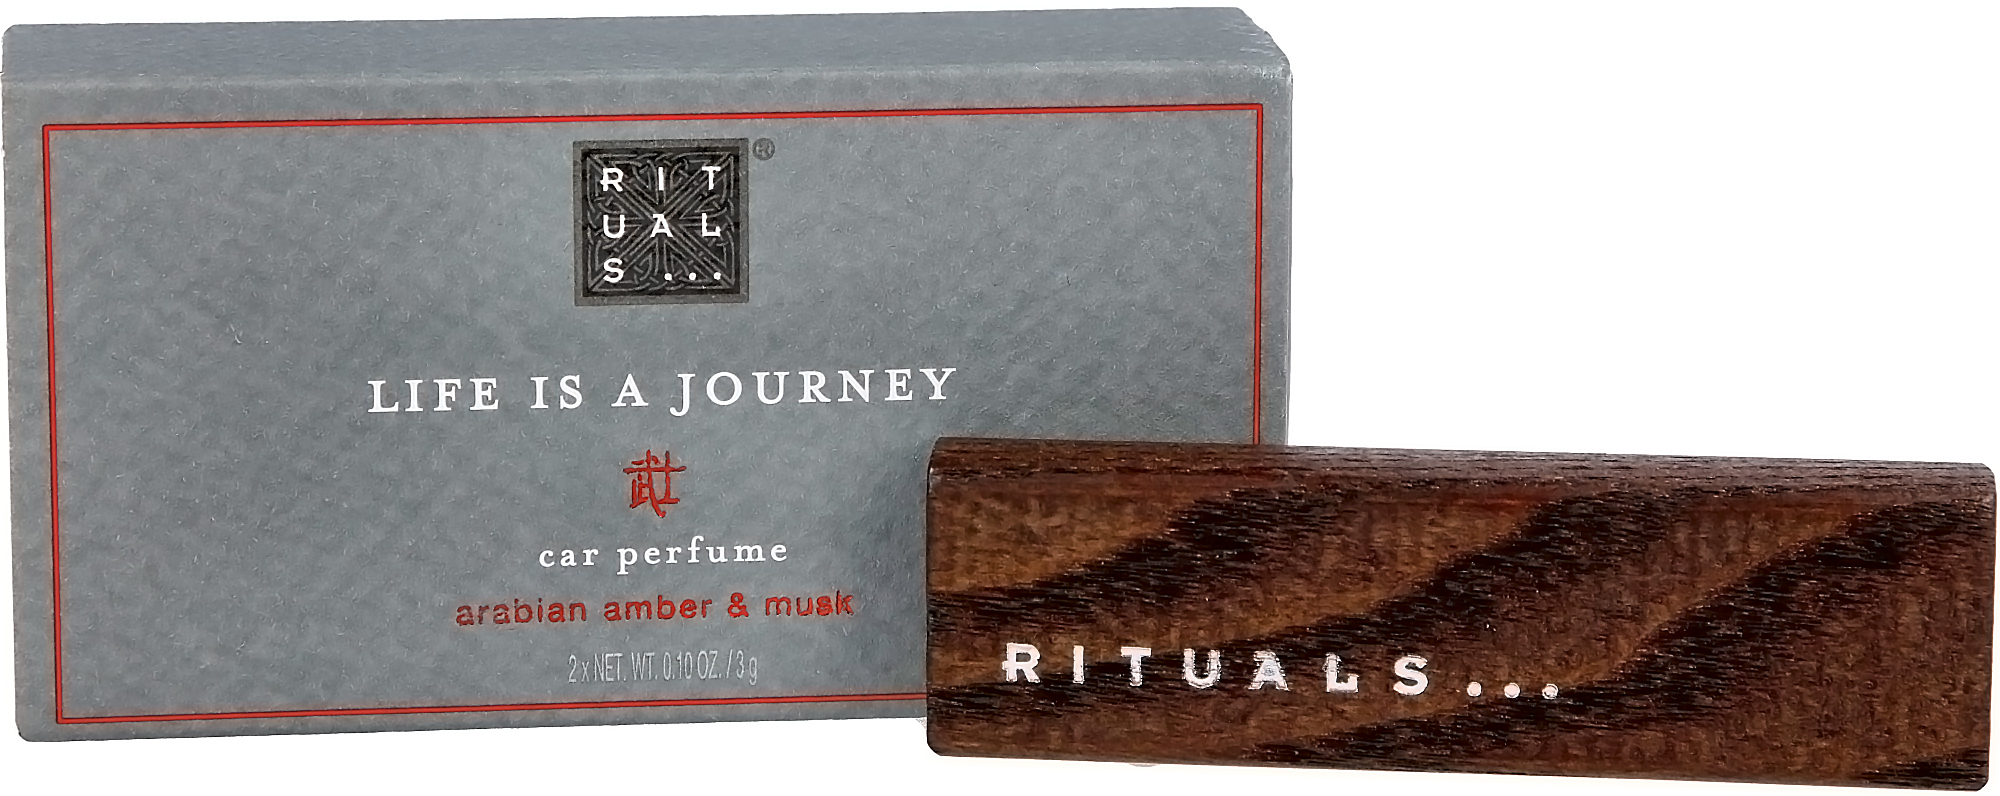 https://lyko.com/globalassets/product-images/rituals-life-is-a-journey---samurai-car-perfume-1808-693-0006_1.jpg?ref=F73A407802